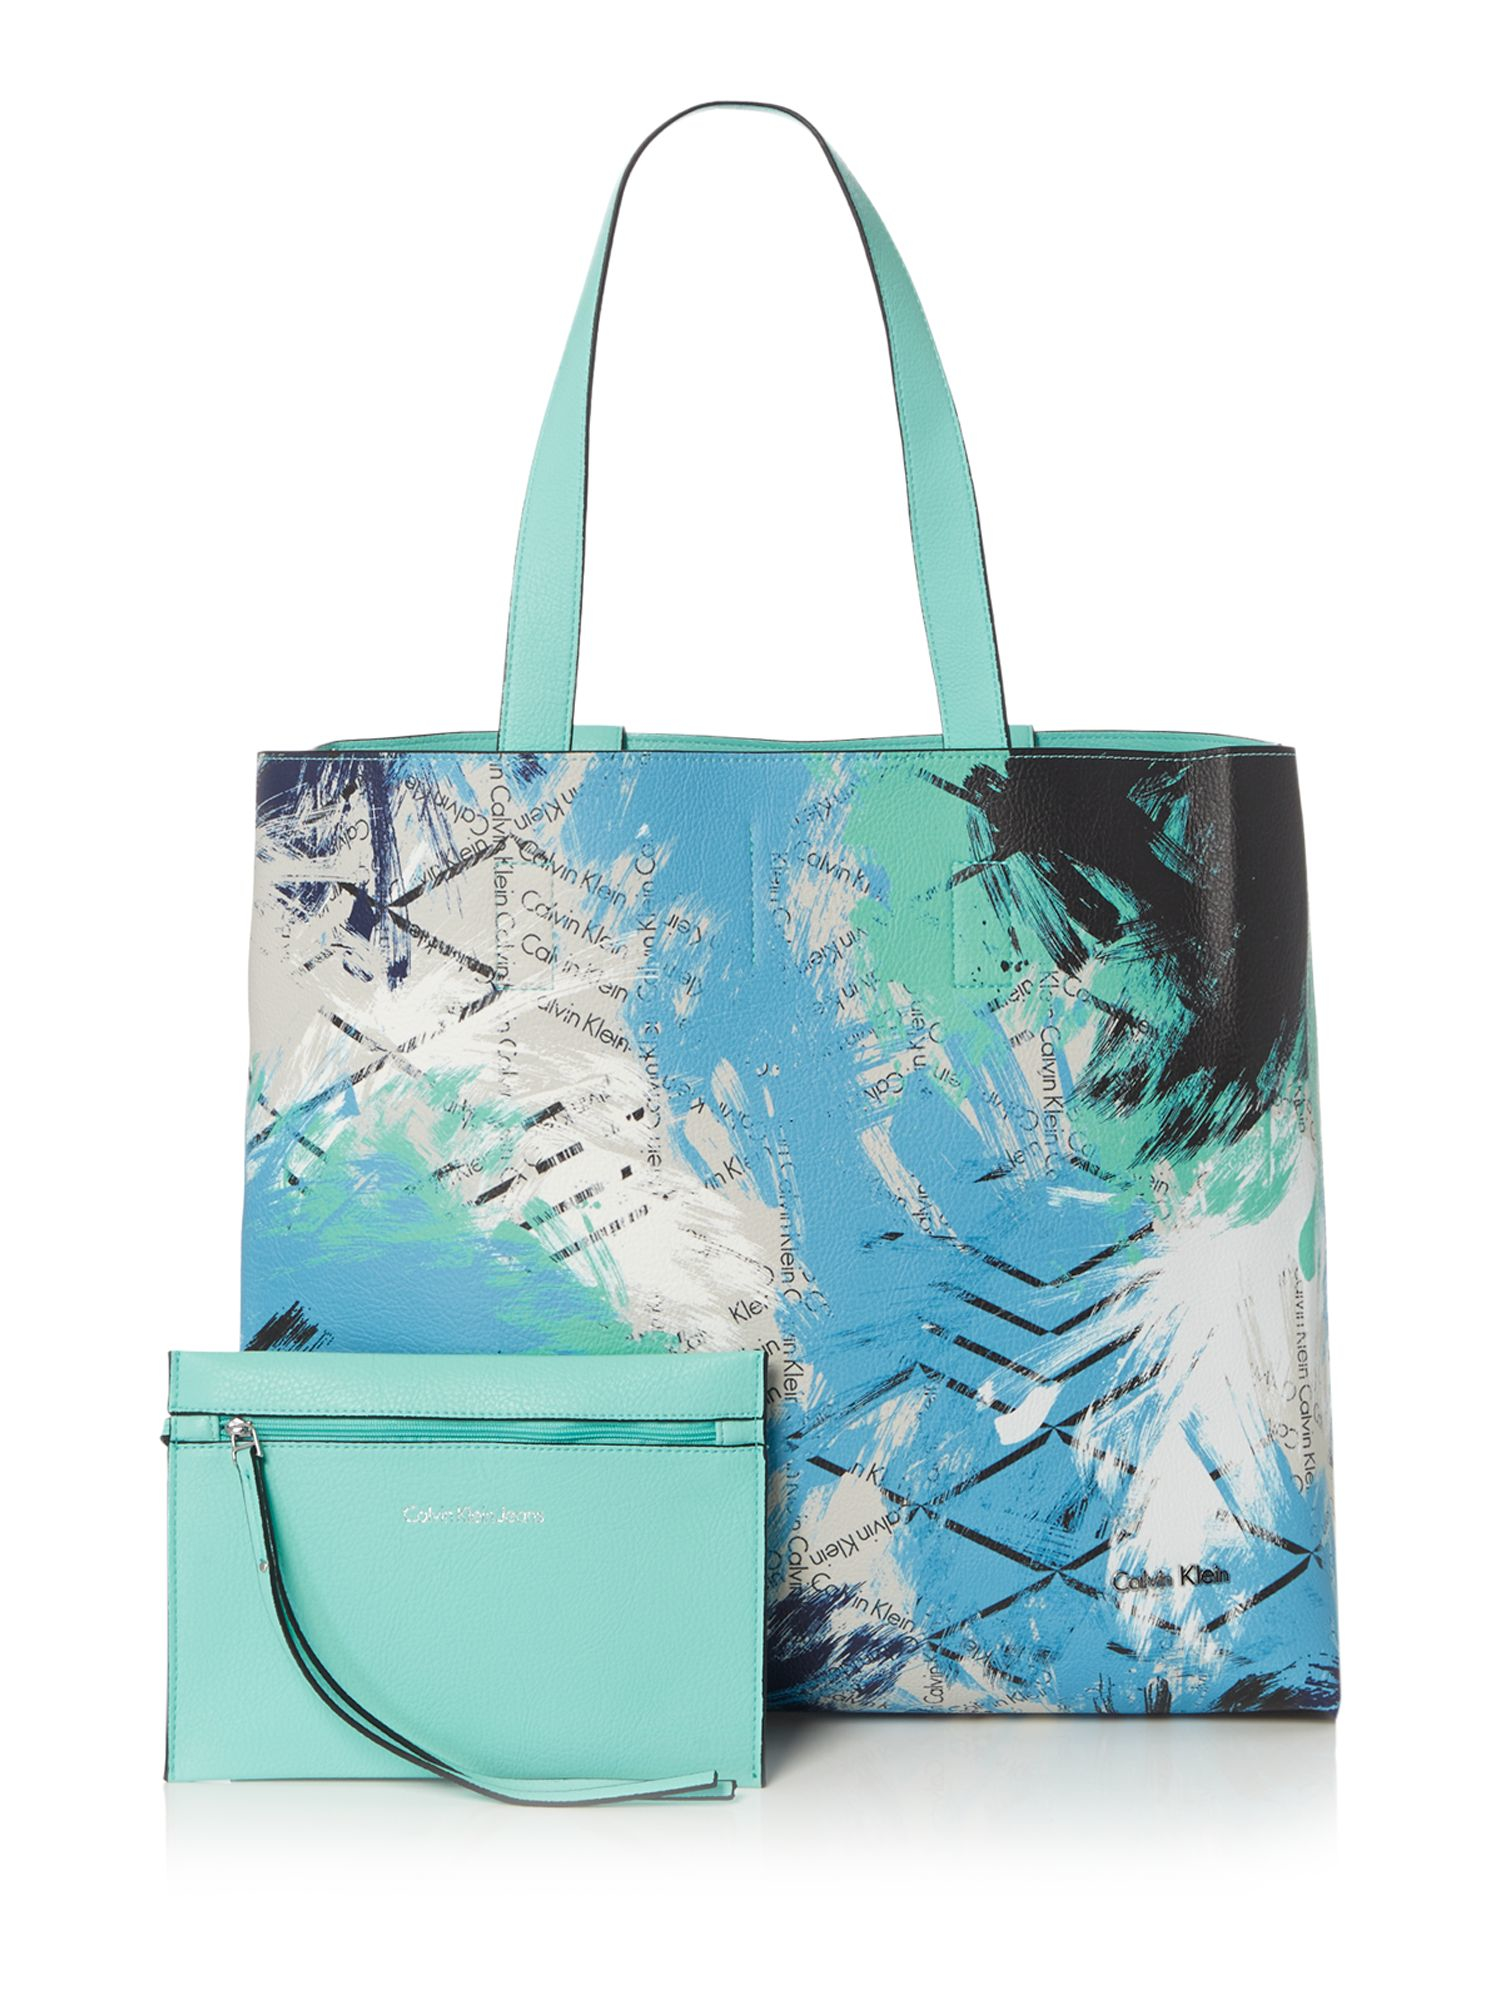 Lyst - Calvin klein Stacy Multi Coloured Reversible Tote Bag in Blue